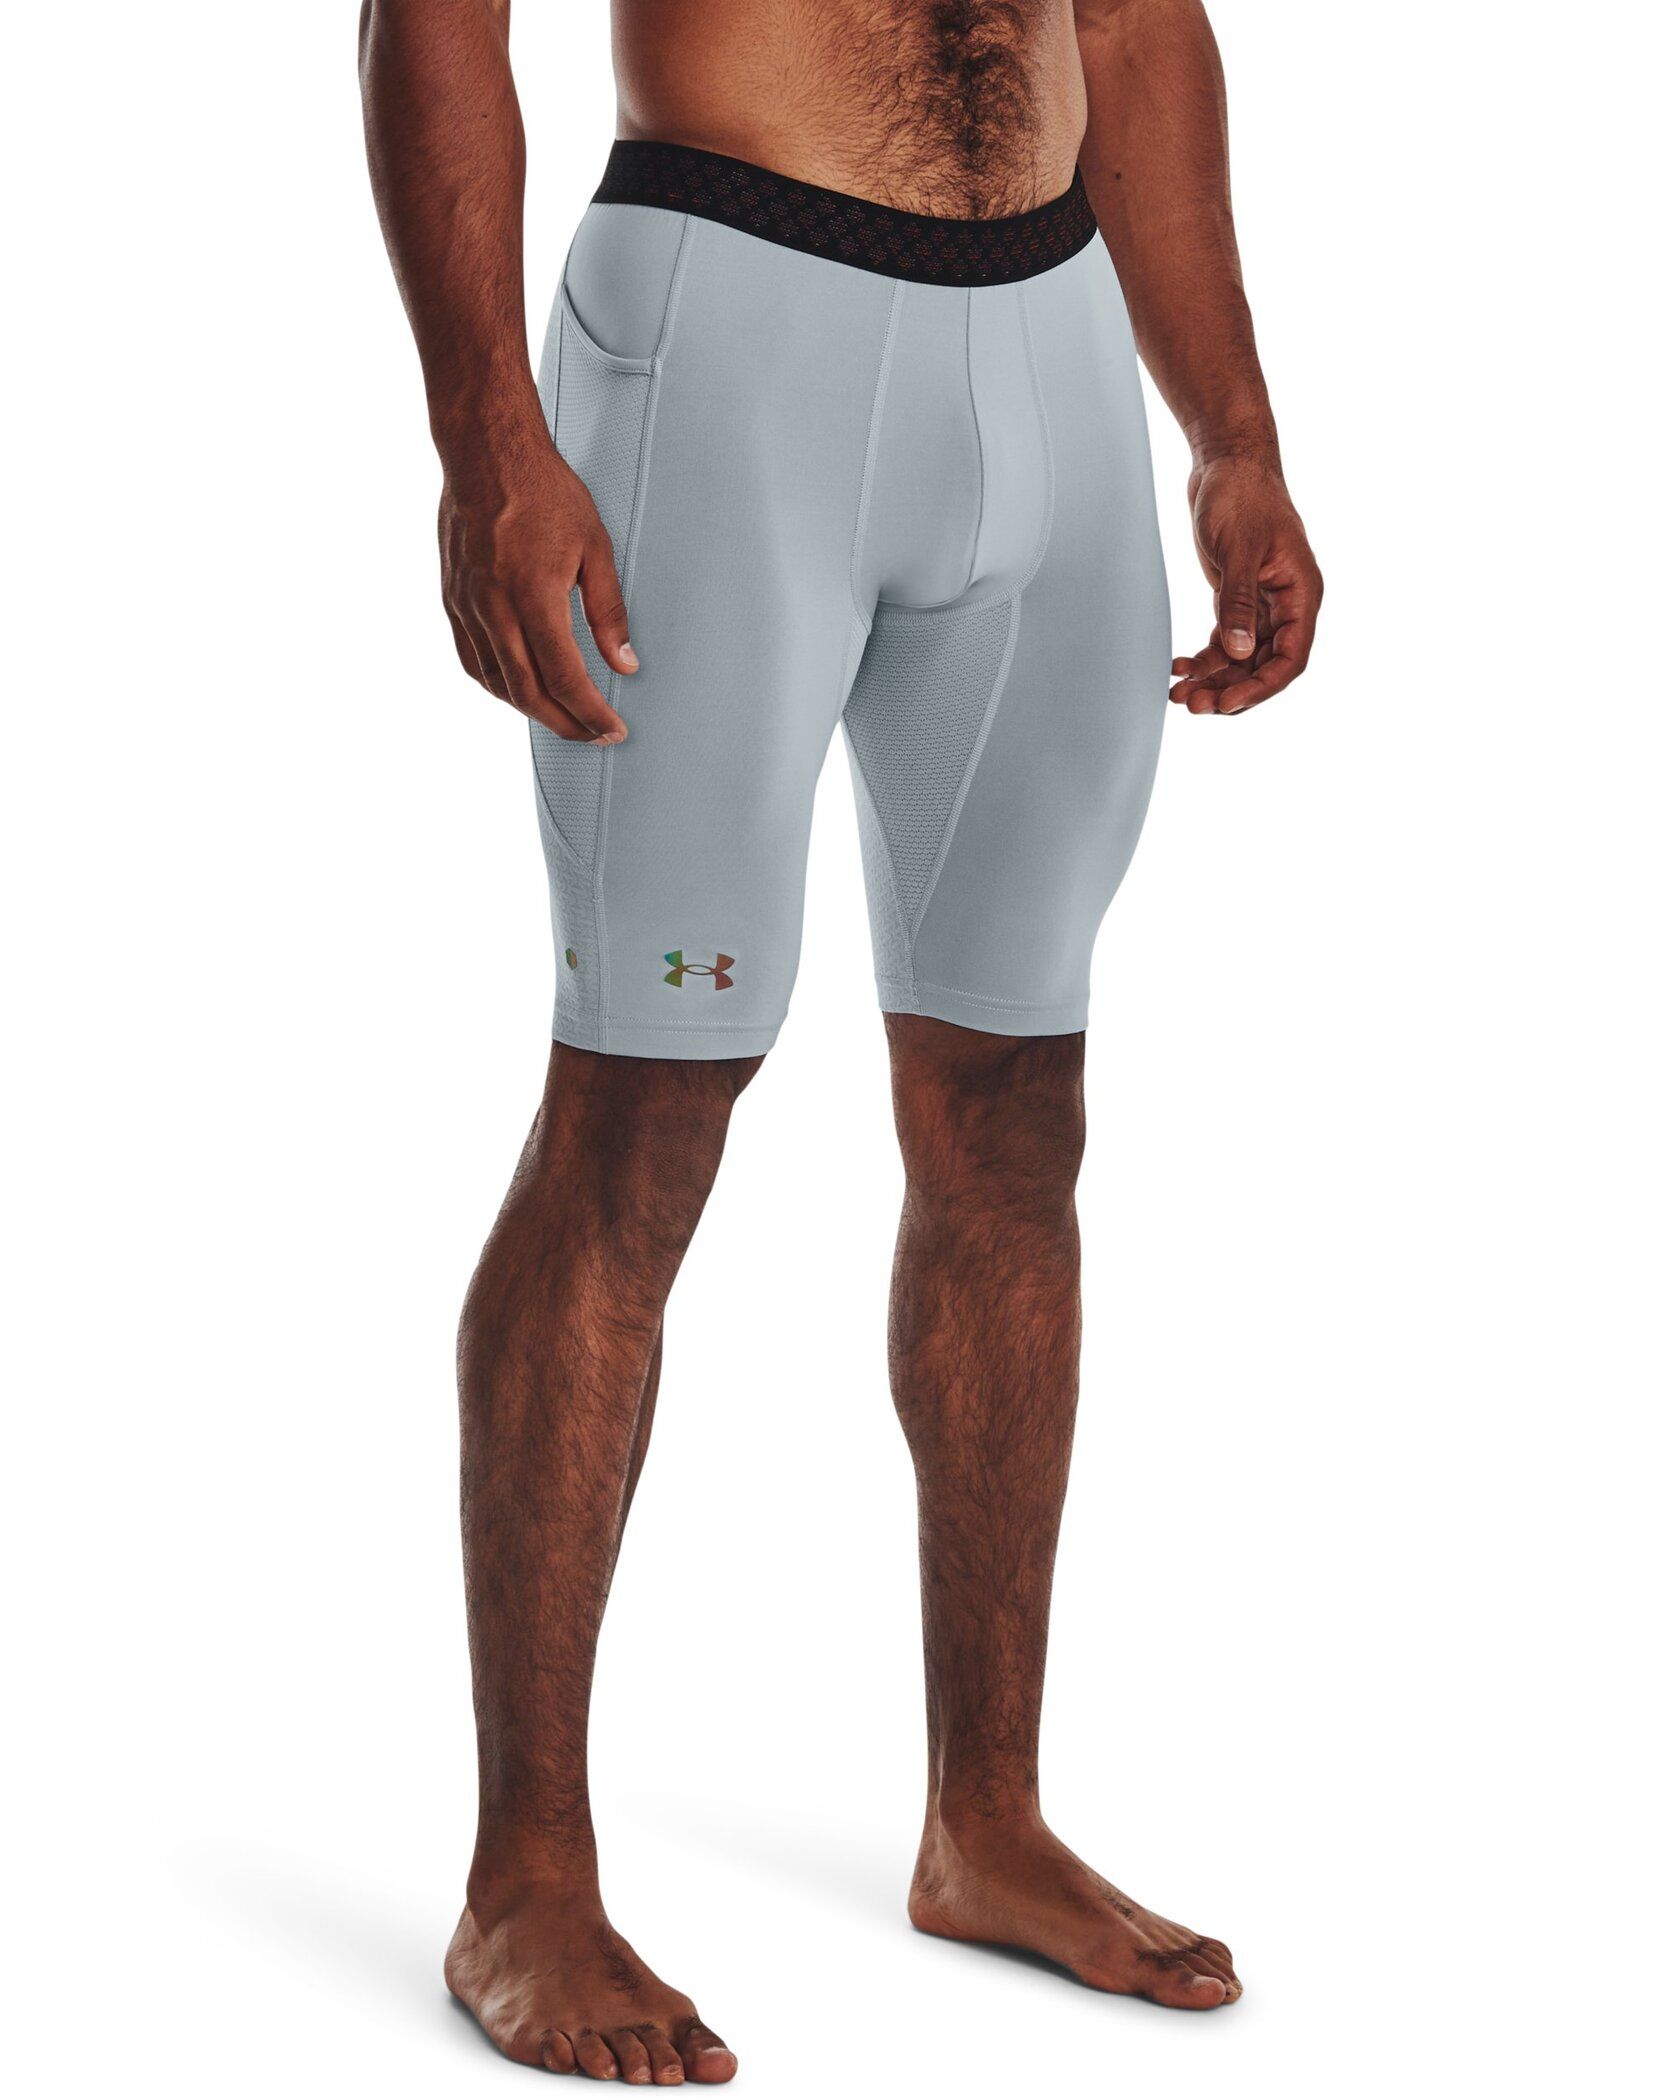 Compression Shorts - Buy Compression Shorts online in India